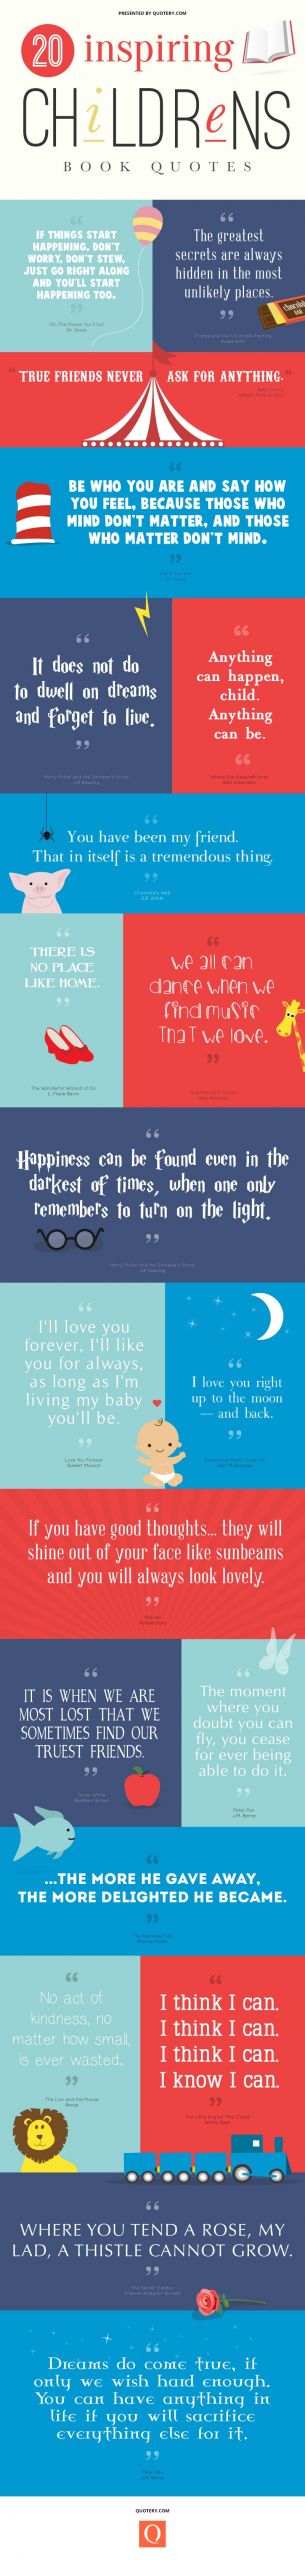 Inspirational Quotes Children Books
 Inspiring Quotes From Children’s Books INFOGRAPHIC